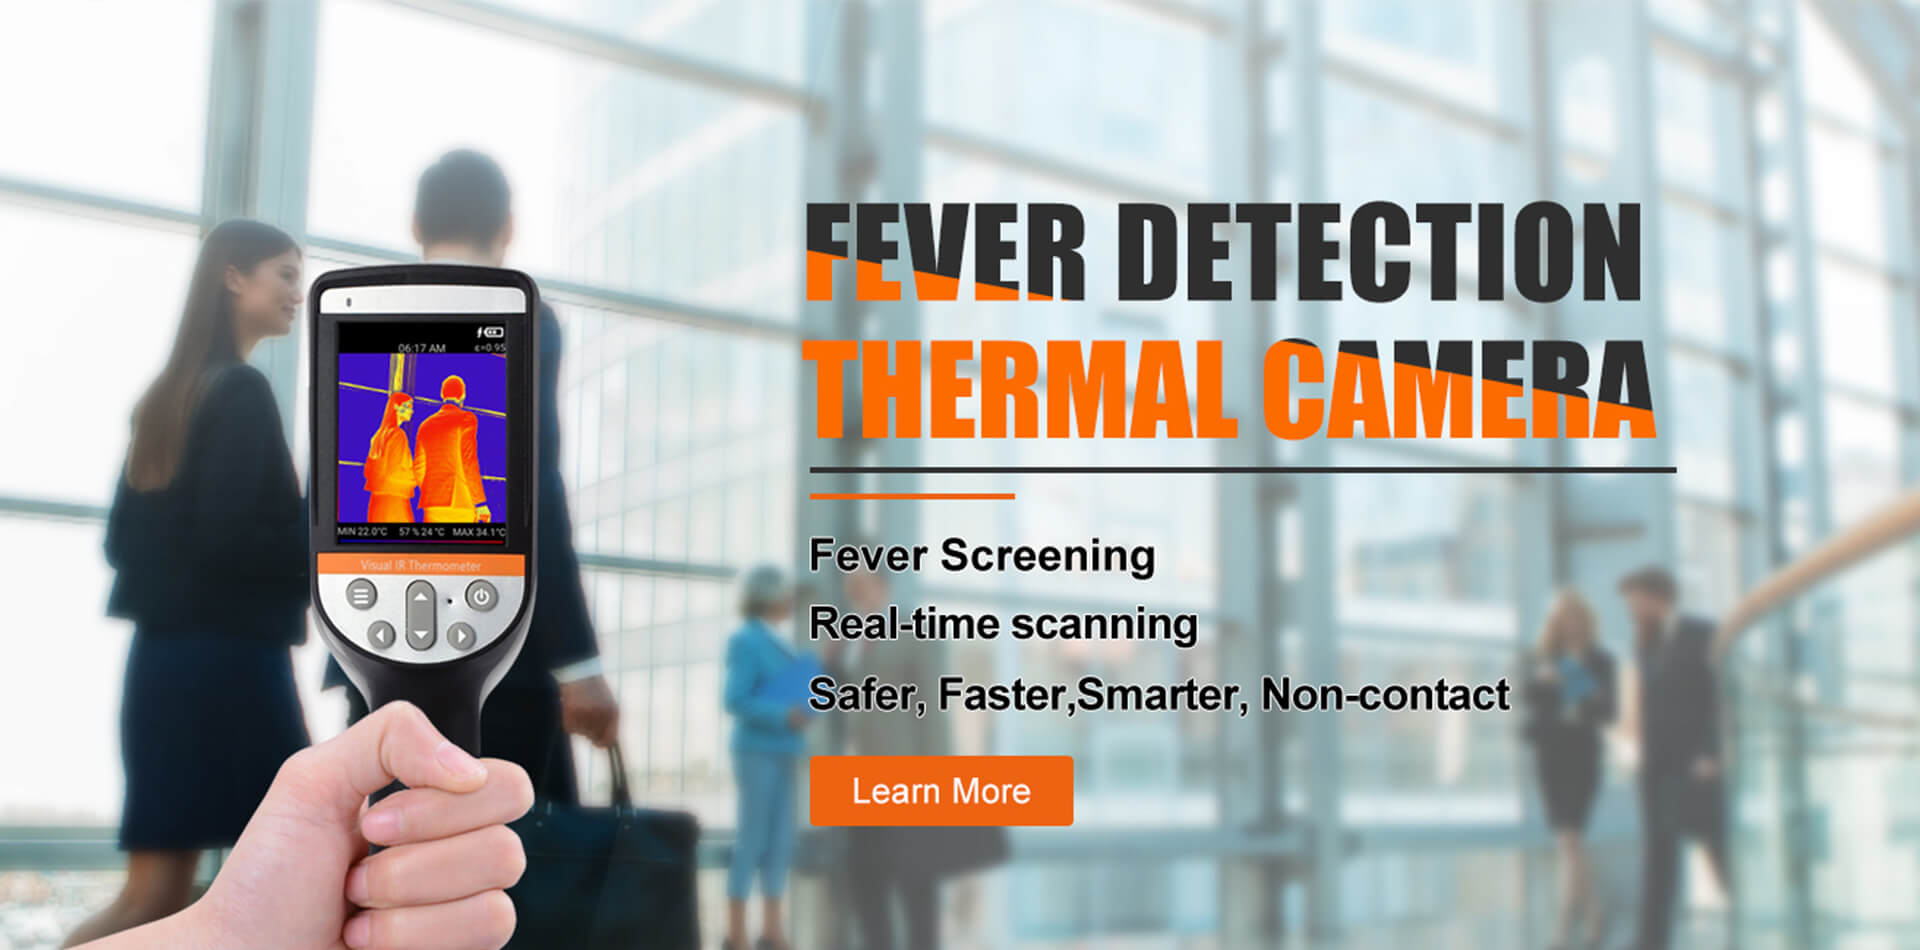 Thermal Imaging Camera for Industry and Fever Screening